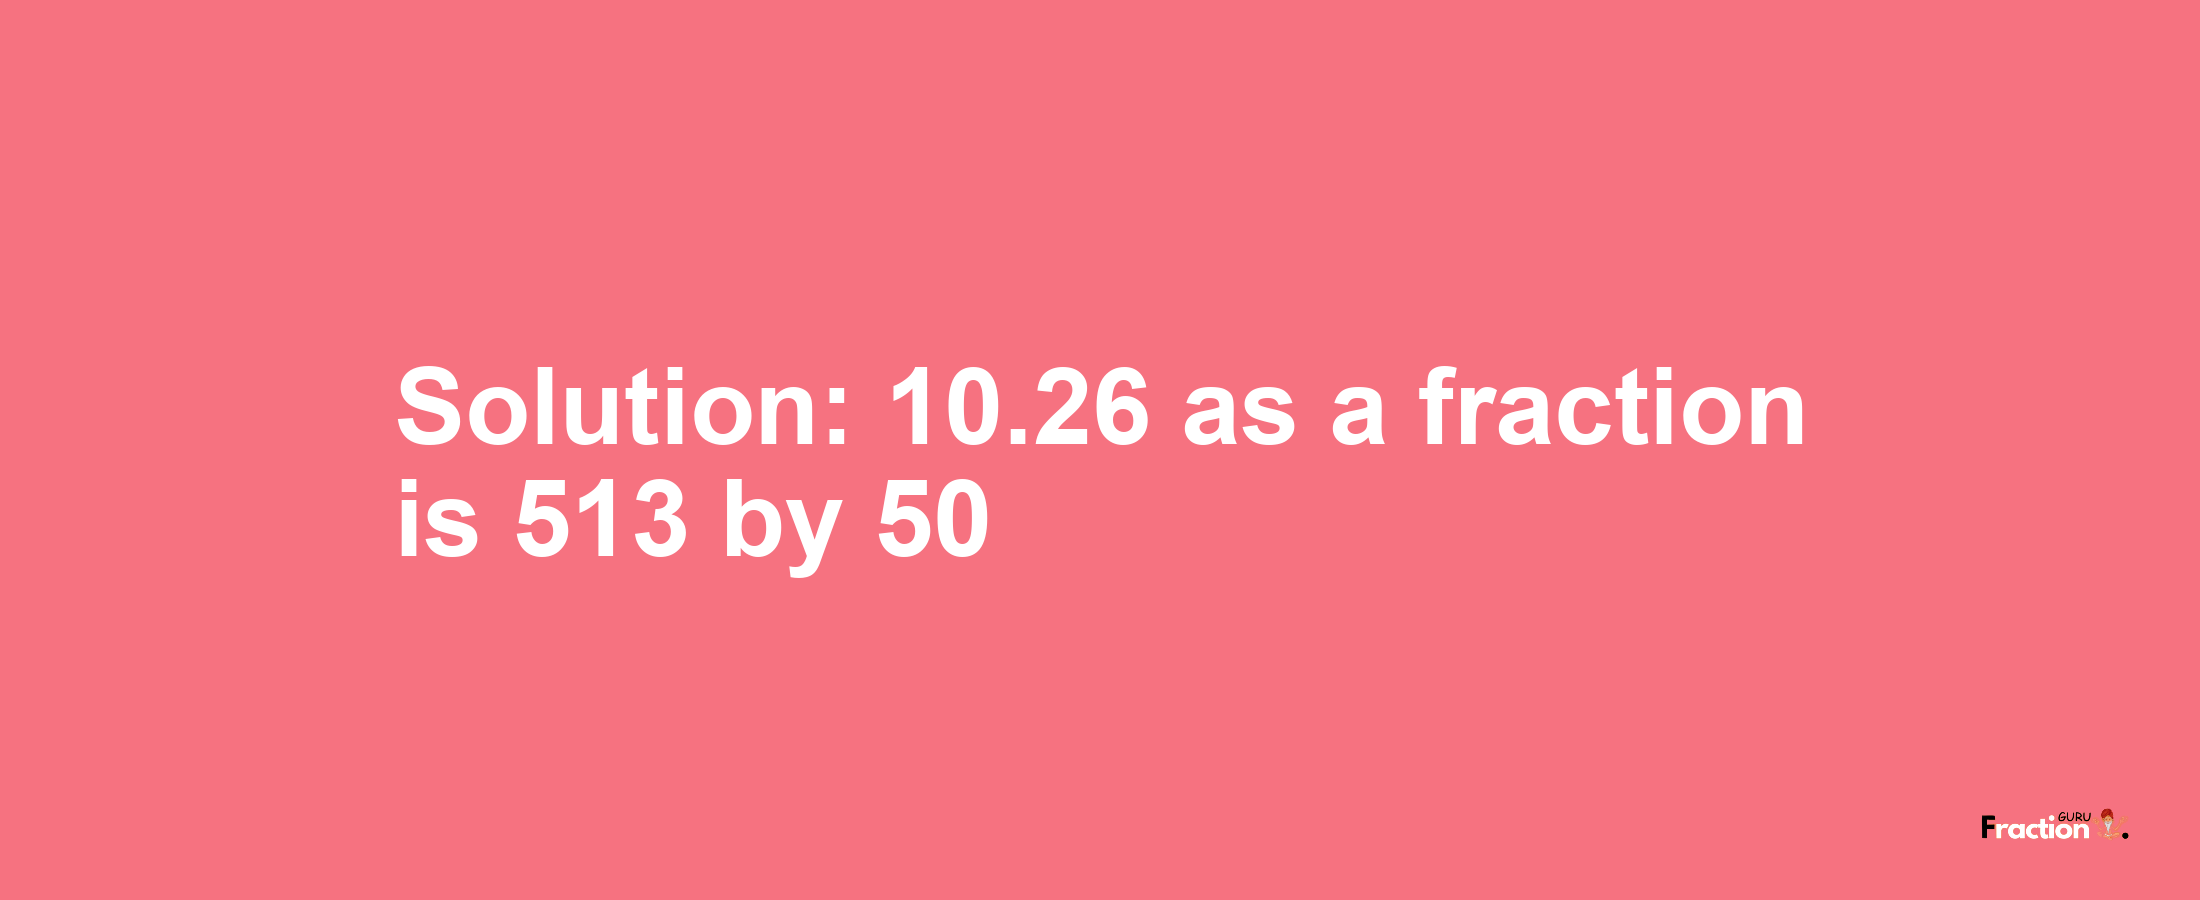 Solution:10.26 as a fraction is 513/50